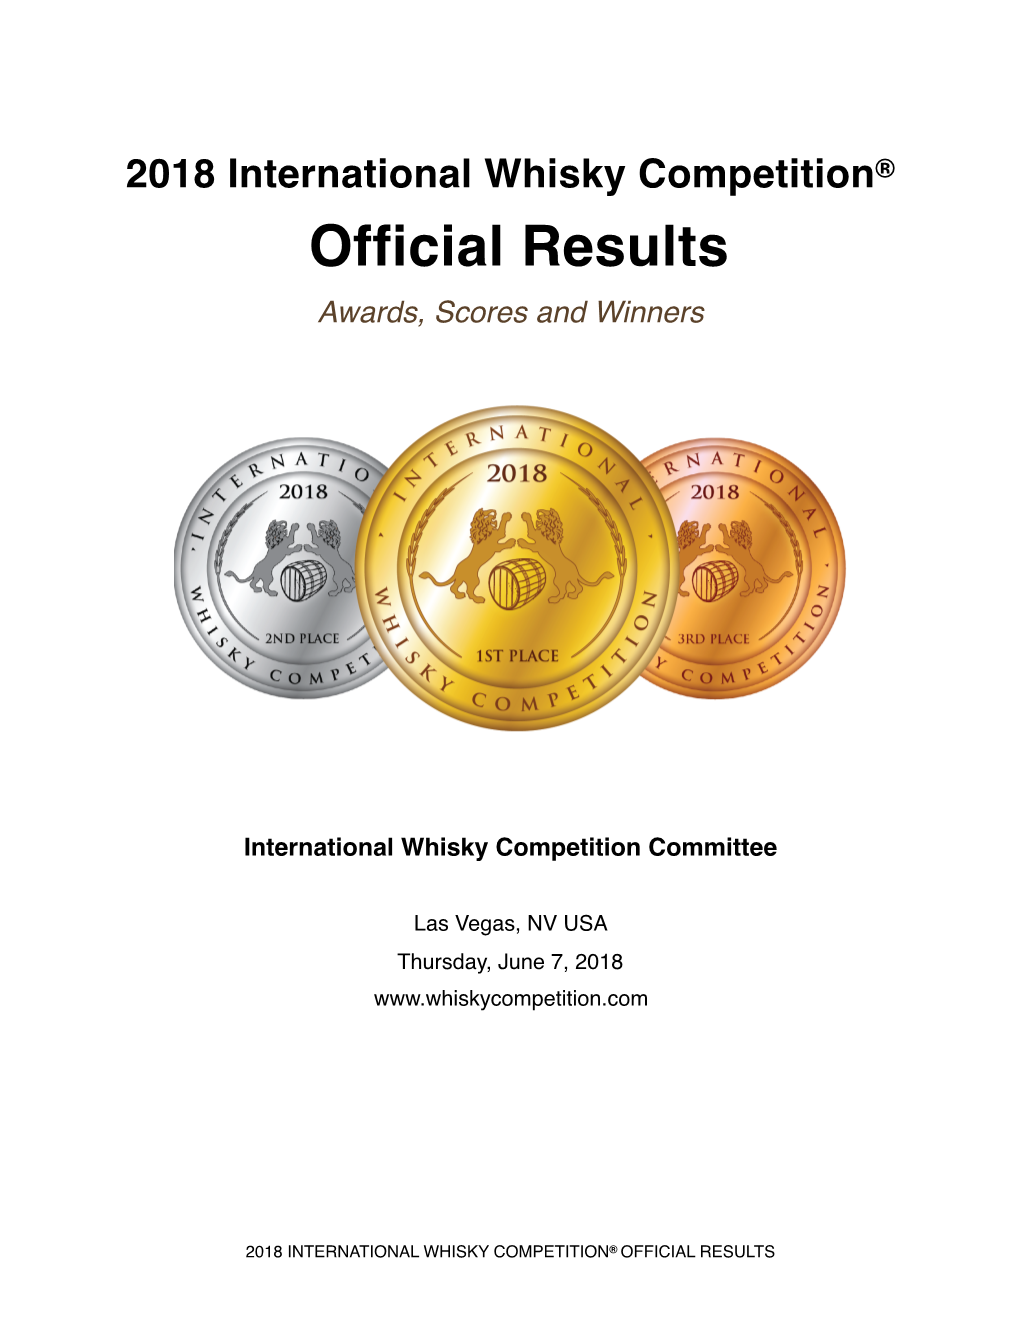 2018 IWC Official Results MASTER PAGES